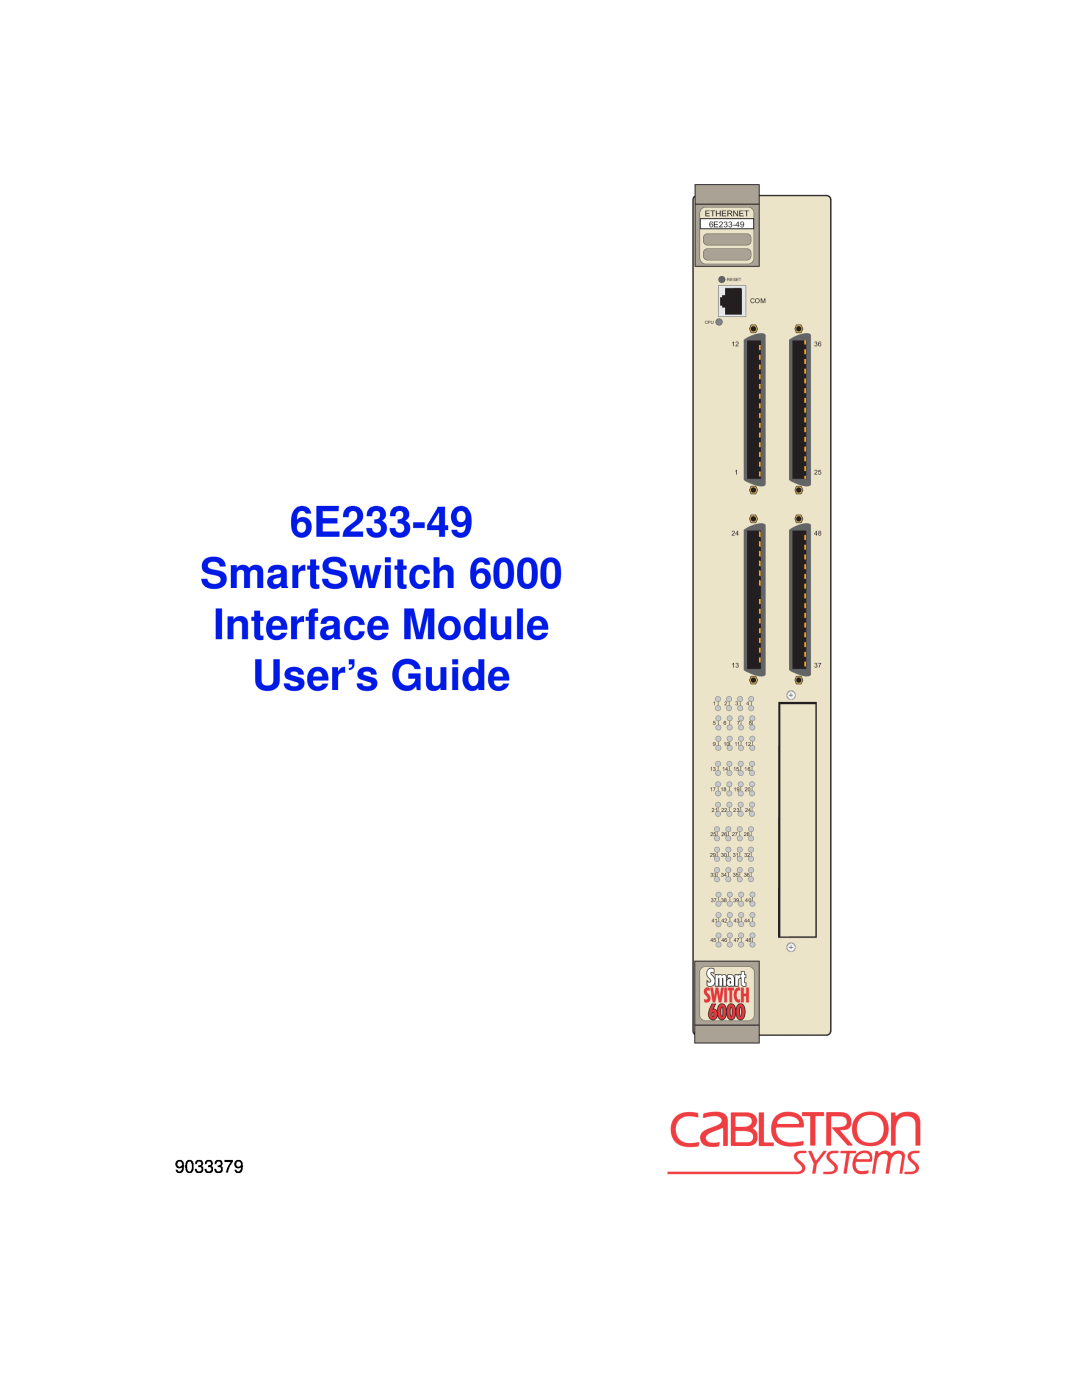 Cabletron Systems 6000 manual SmartSwitch Interface Module User’s Guide, 9033379, 6E233-49Title Page, ETHERNET 6E233-49 